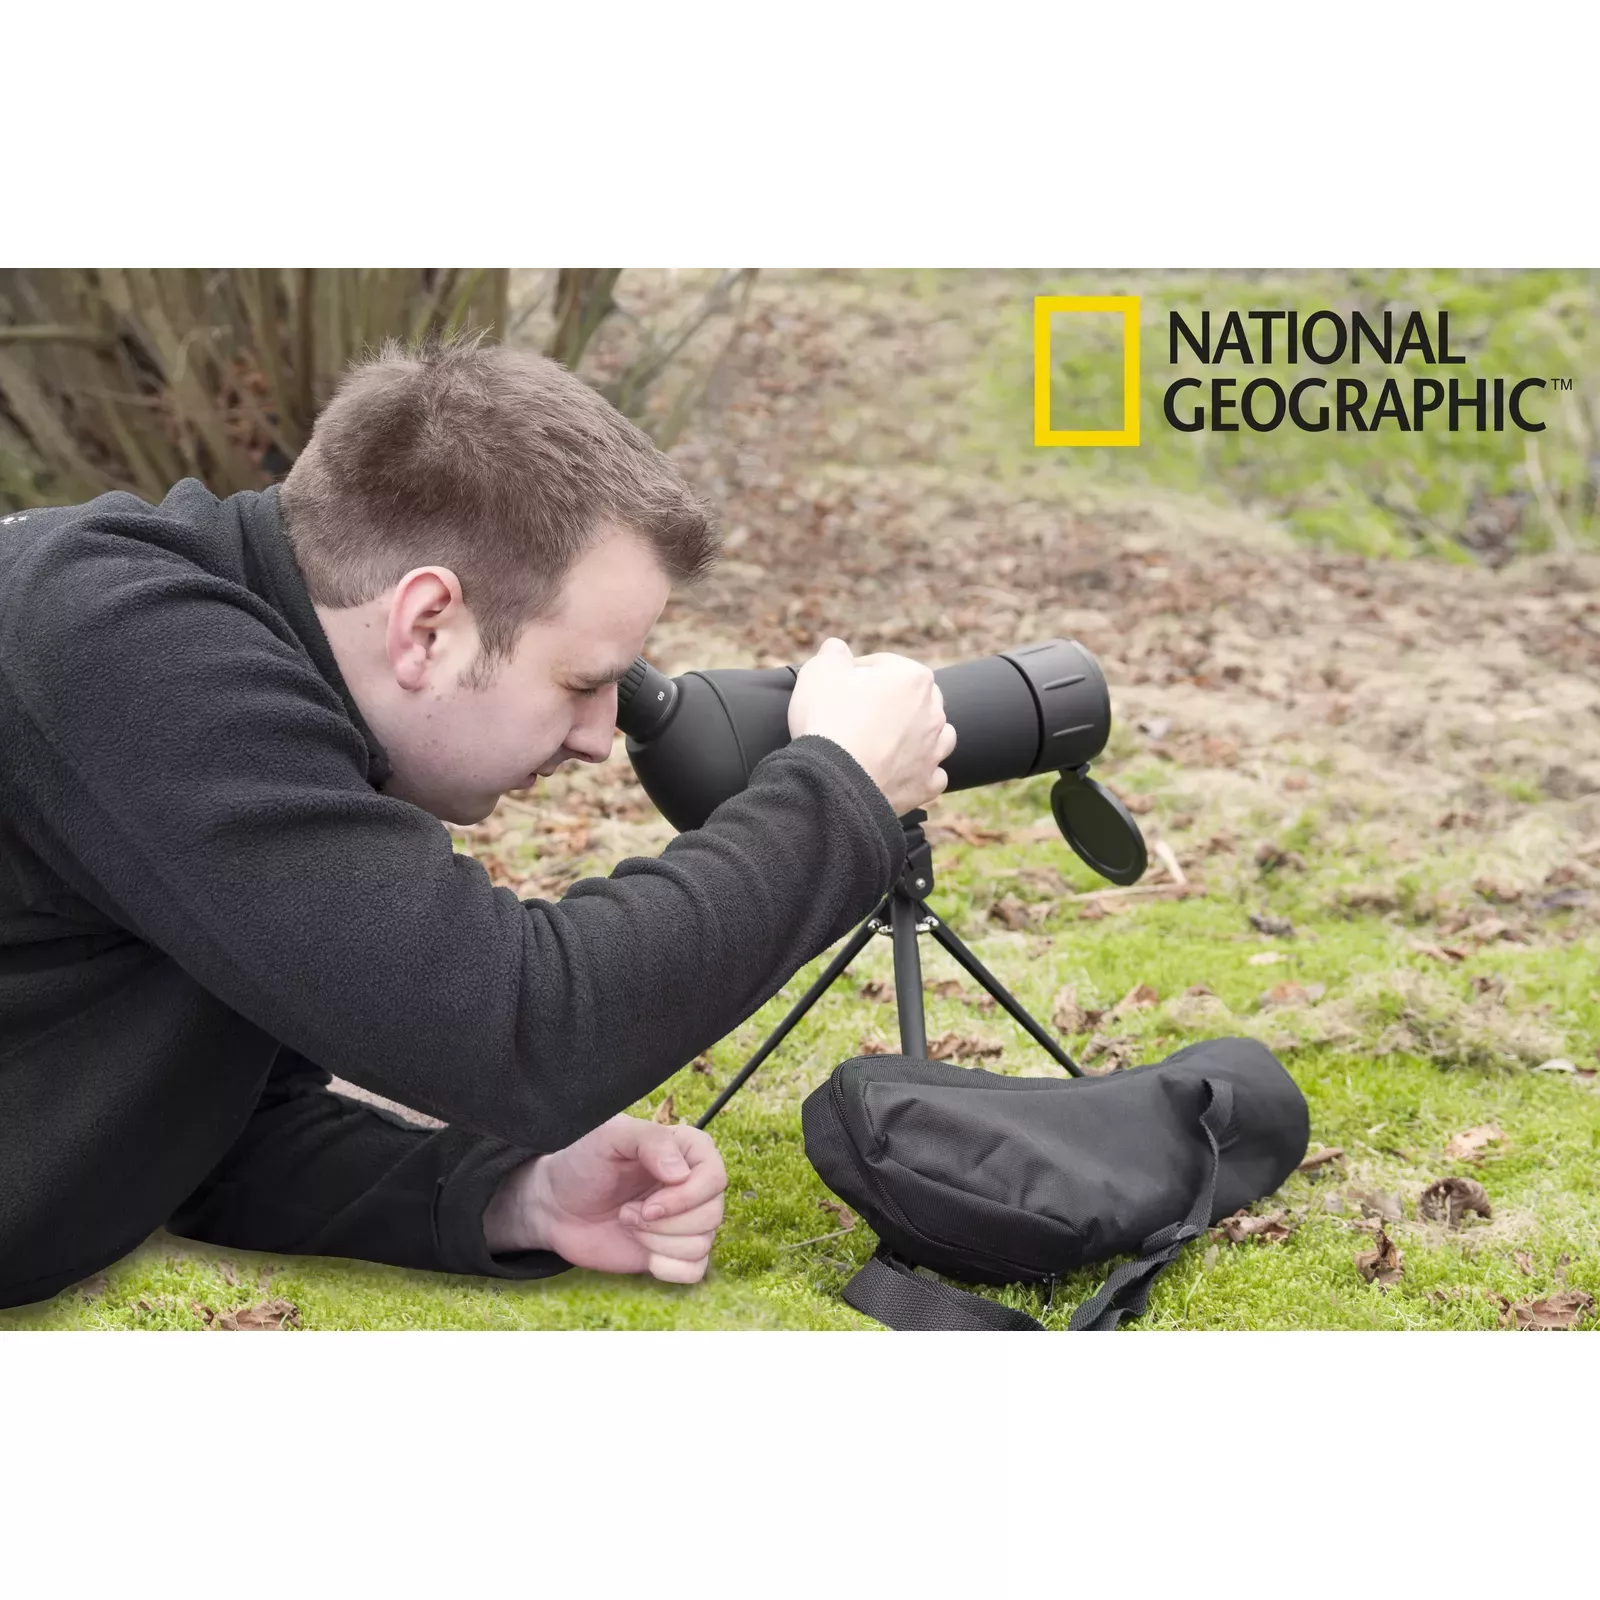 national geographic 9057000 Photo 4